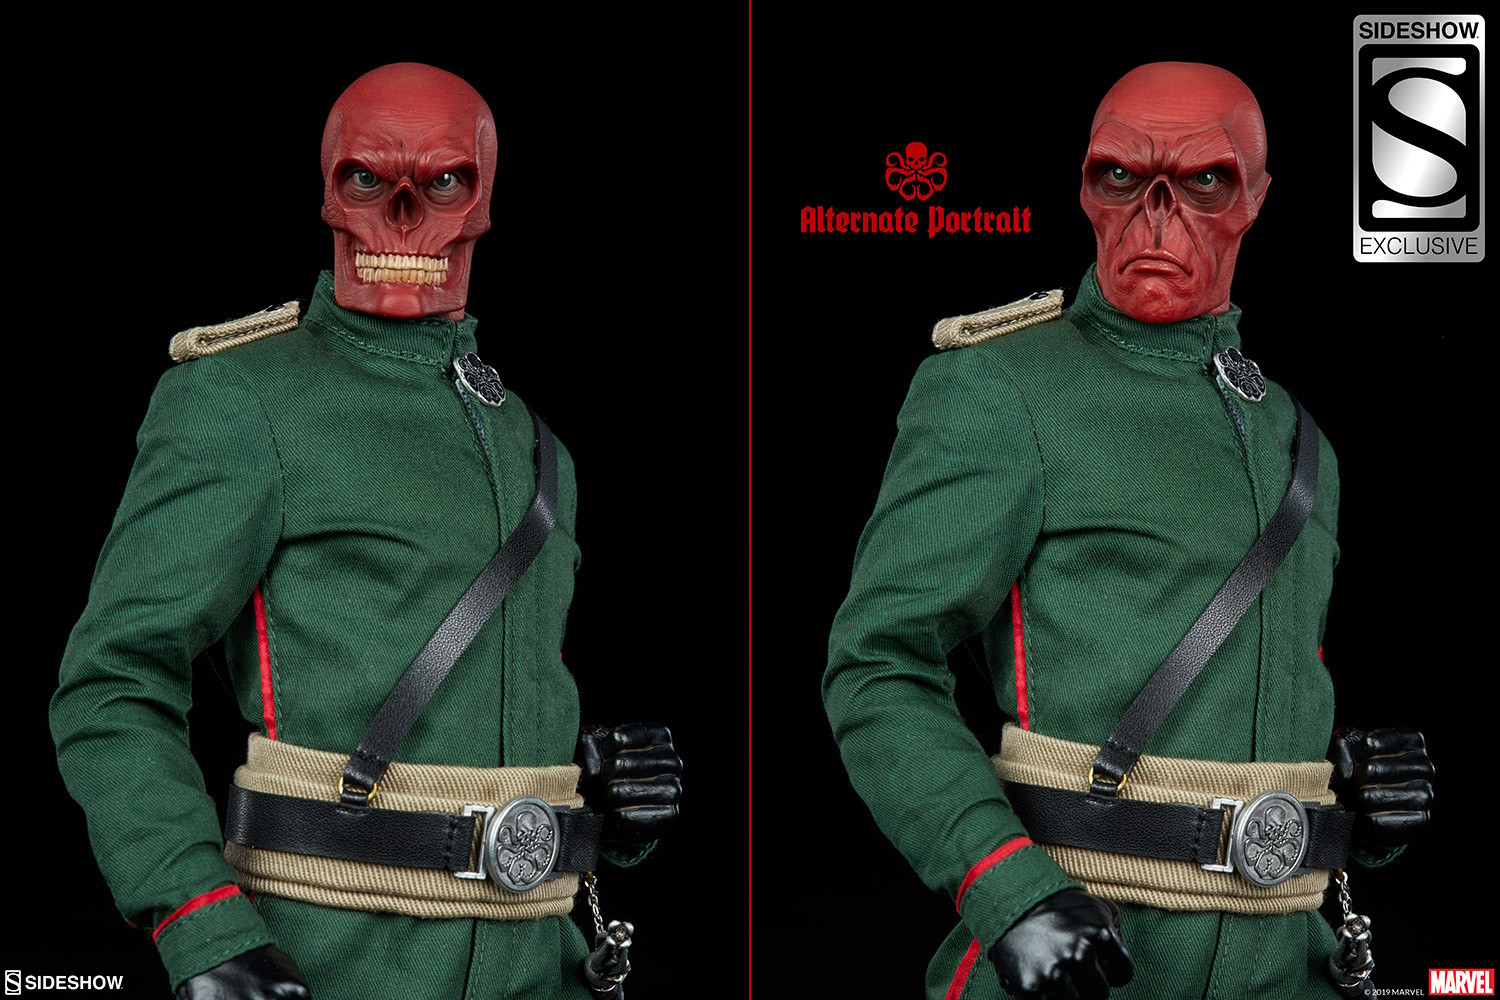 Red Skull Exclusive Edition View 1